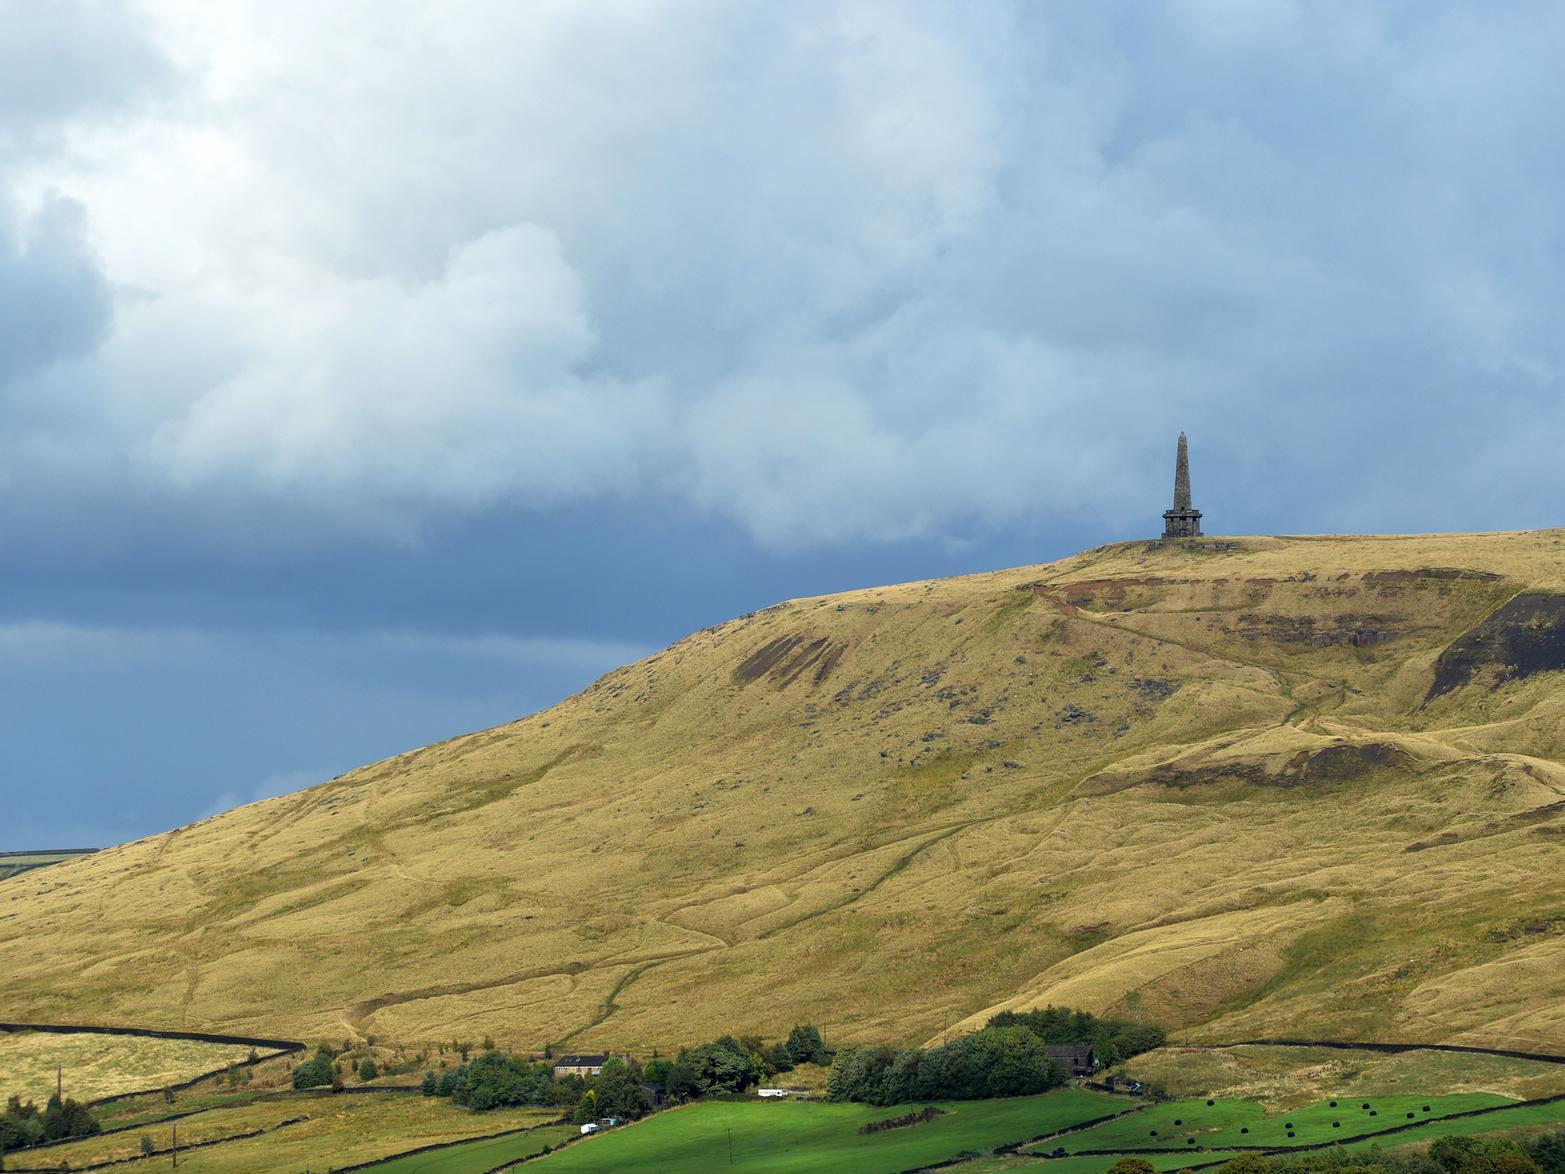 A hike up Stoodley Pike, near Todmorden, is a great way to get the family out into the fresh air. Trek up the South Pennine hill to the Stoodley Pike Monument and admire the wonderful valley views.